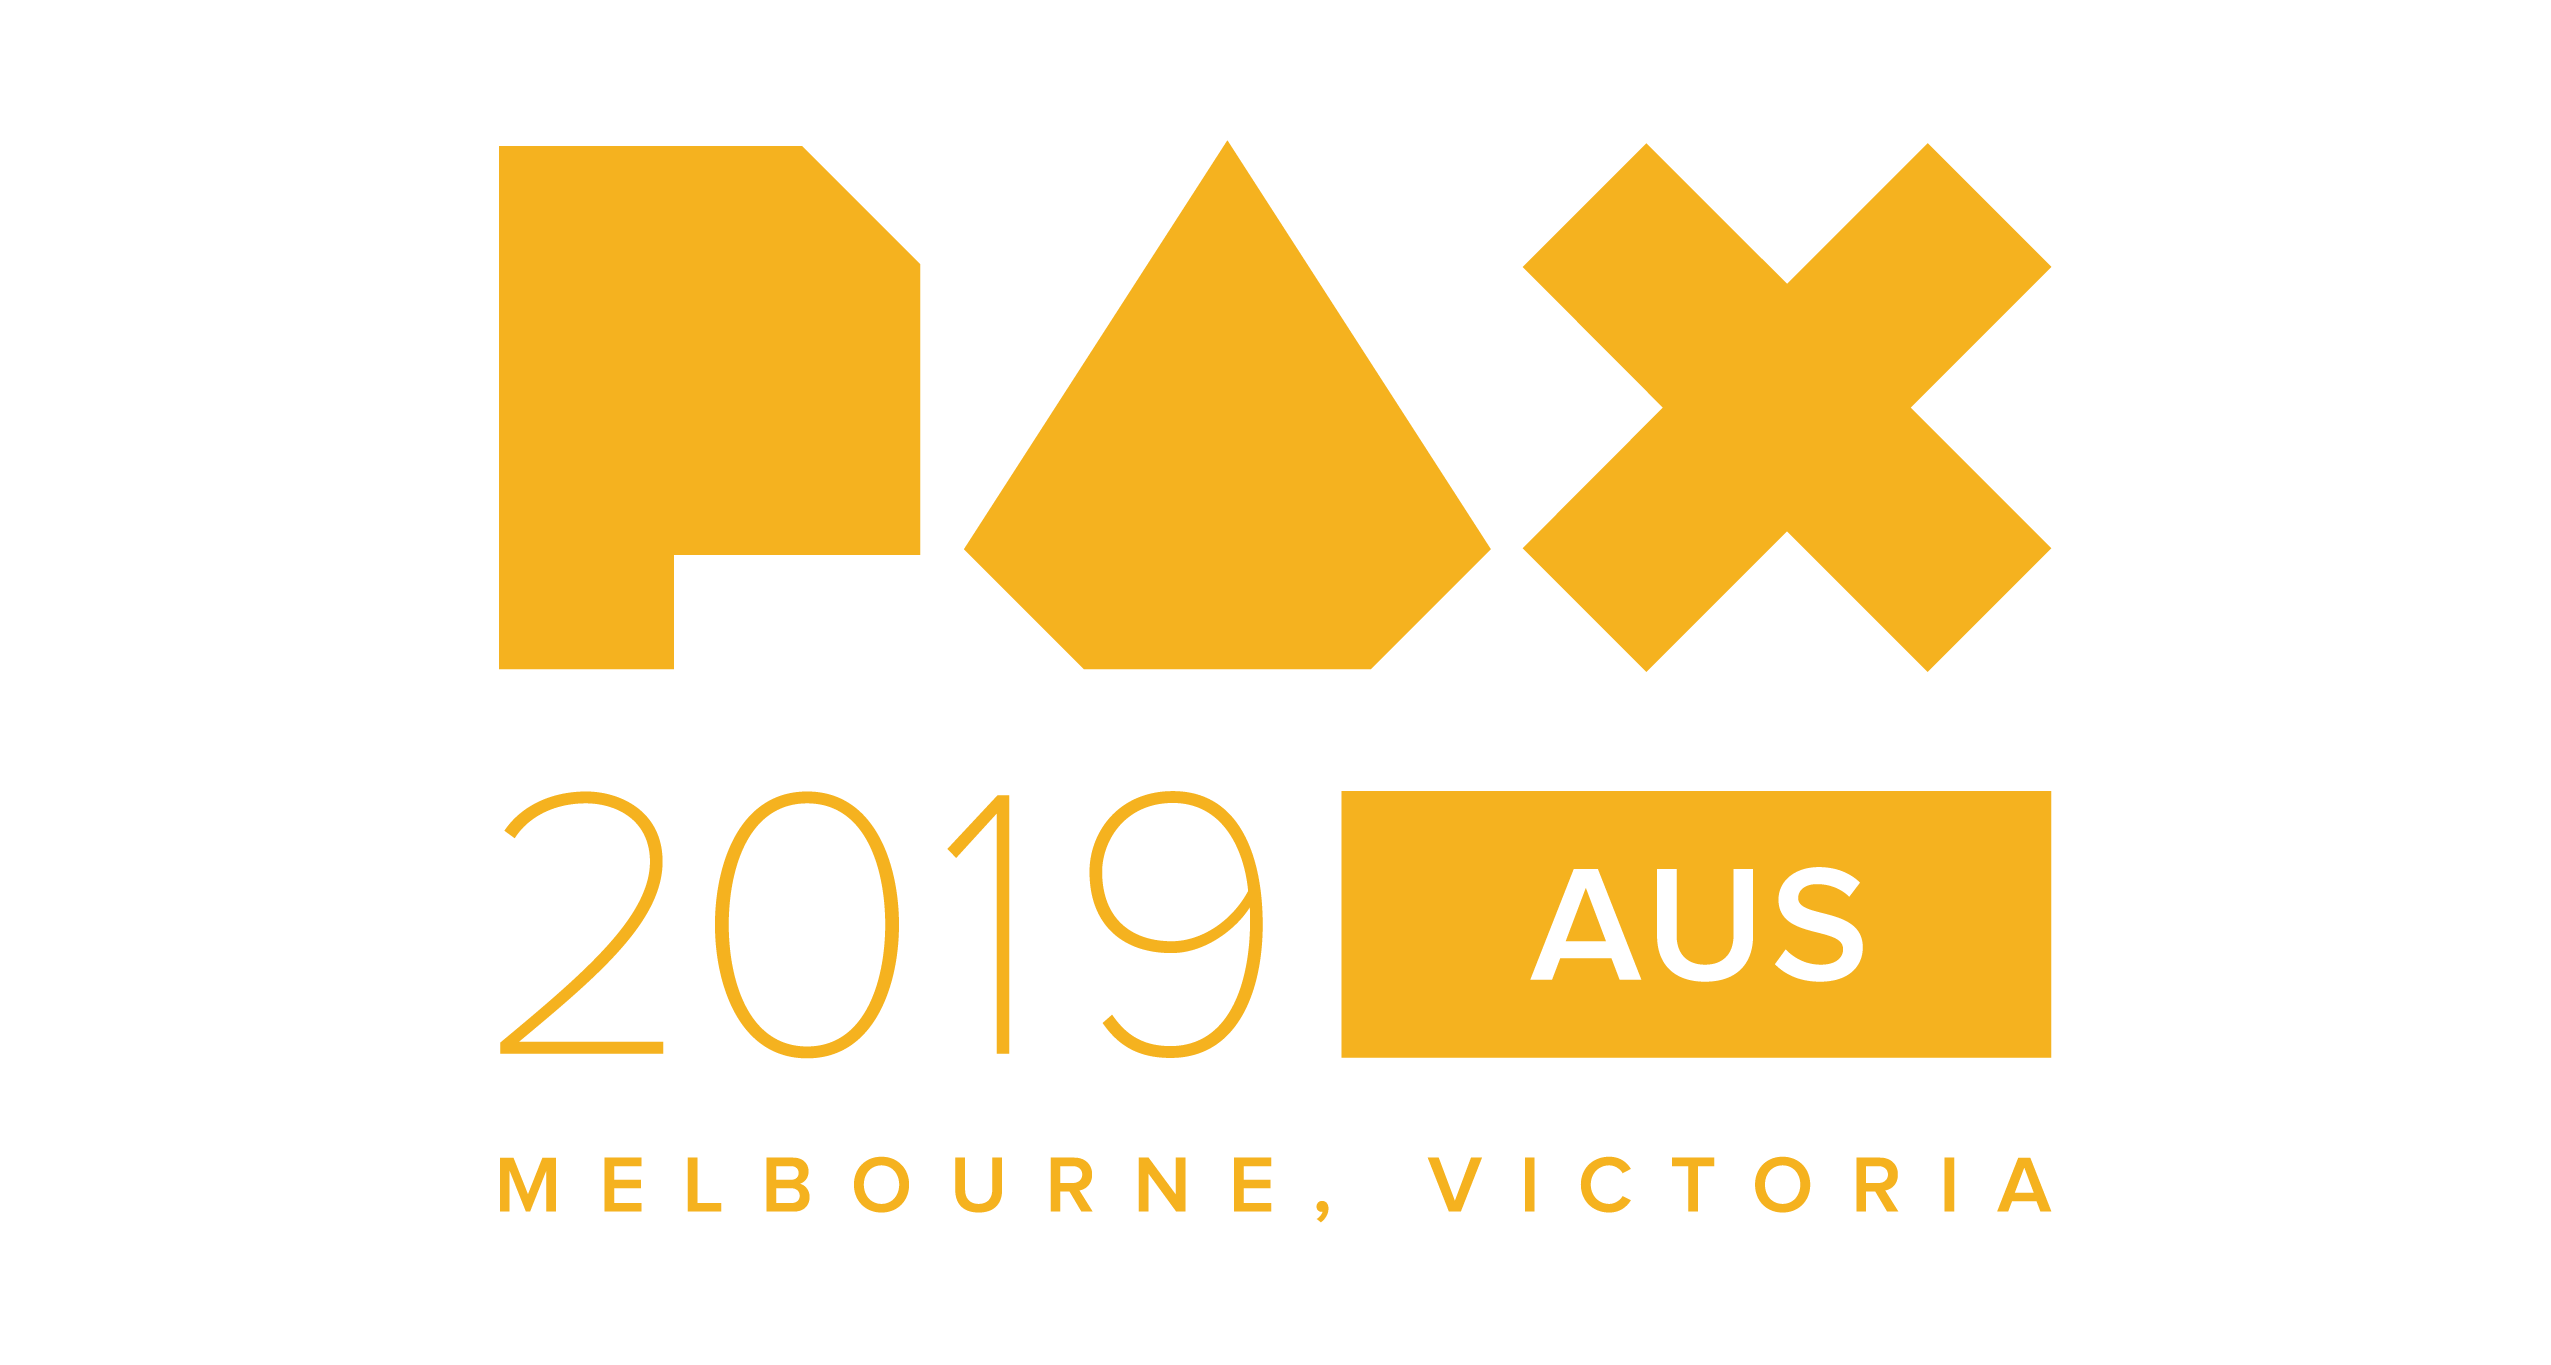 PAX is coming to Melbourne again this year, get your tickets now Ausdroid